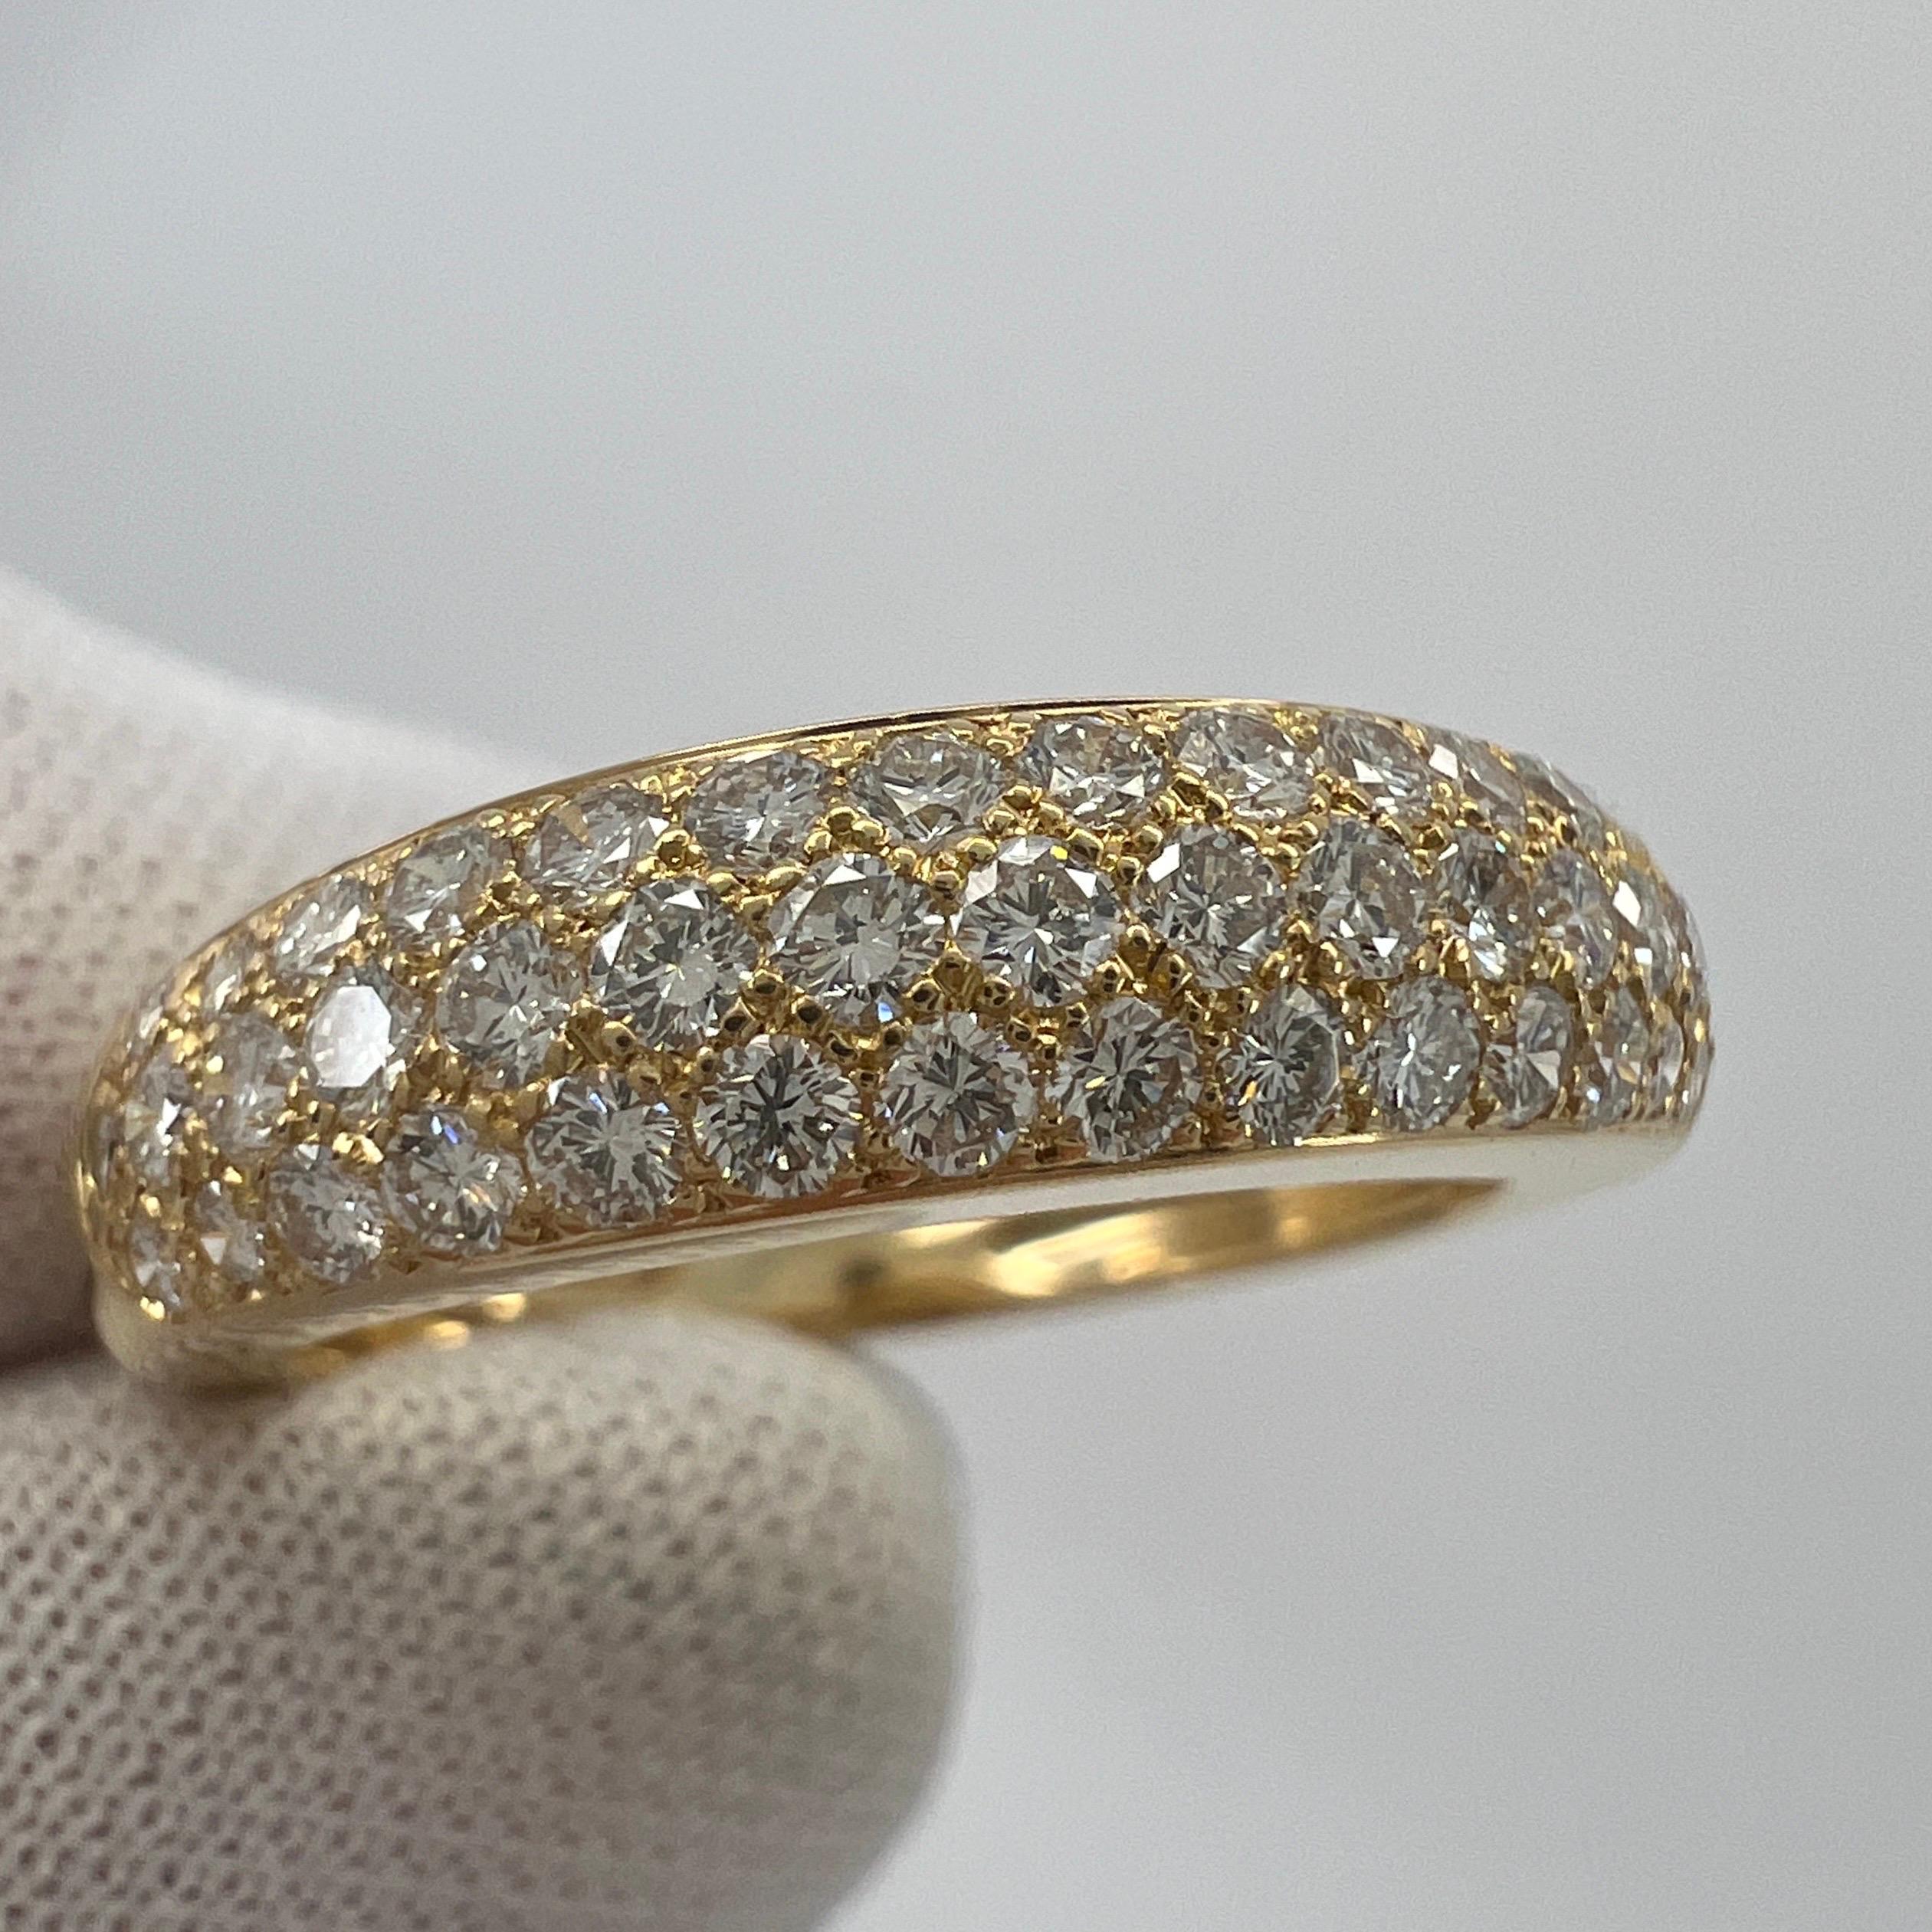 Rare Vintage Van Cleef & Arpels Pavé Diamond 18k Yellow Gold Band Dome Ring For Sale 7